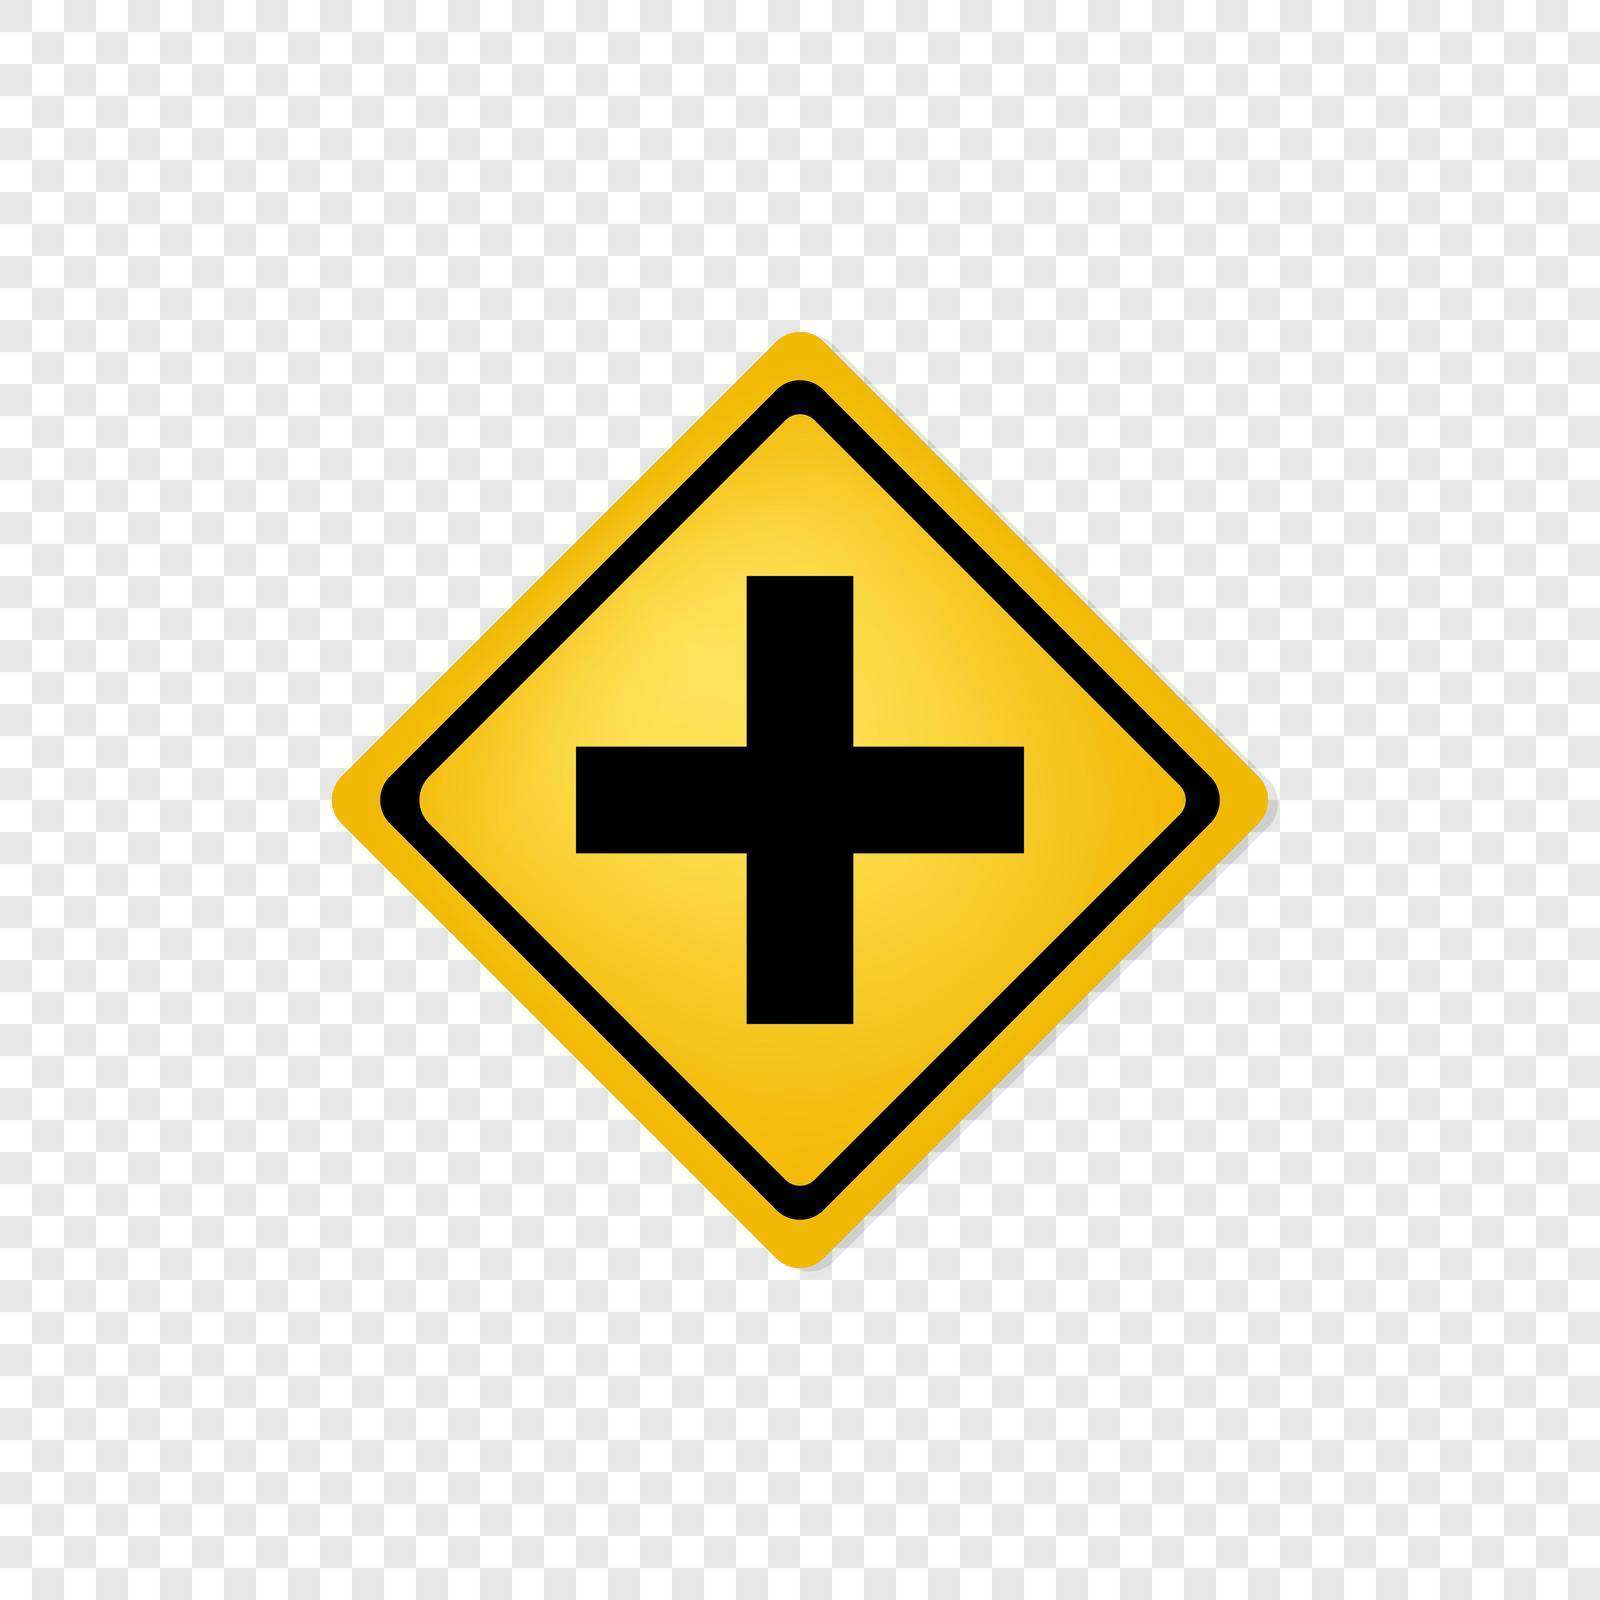 Road sign cross road icon. Vector eps10